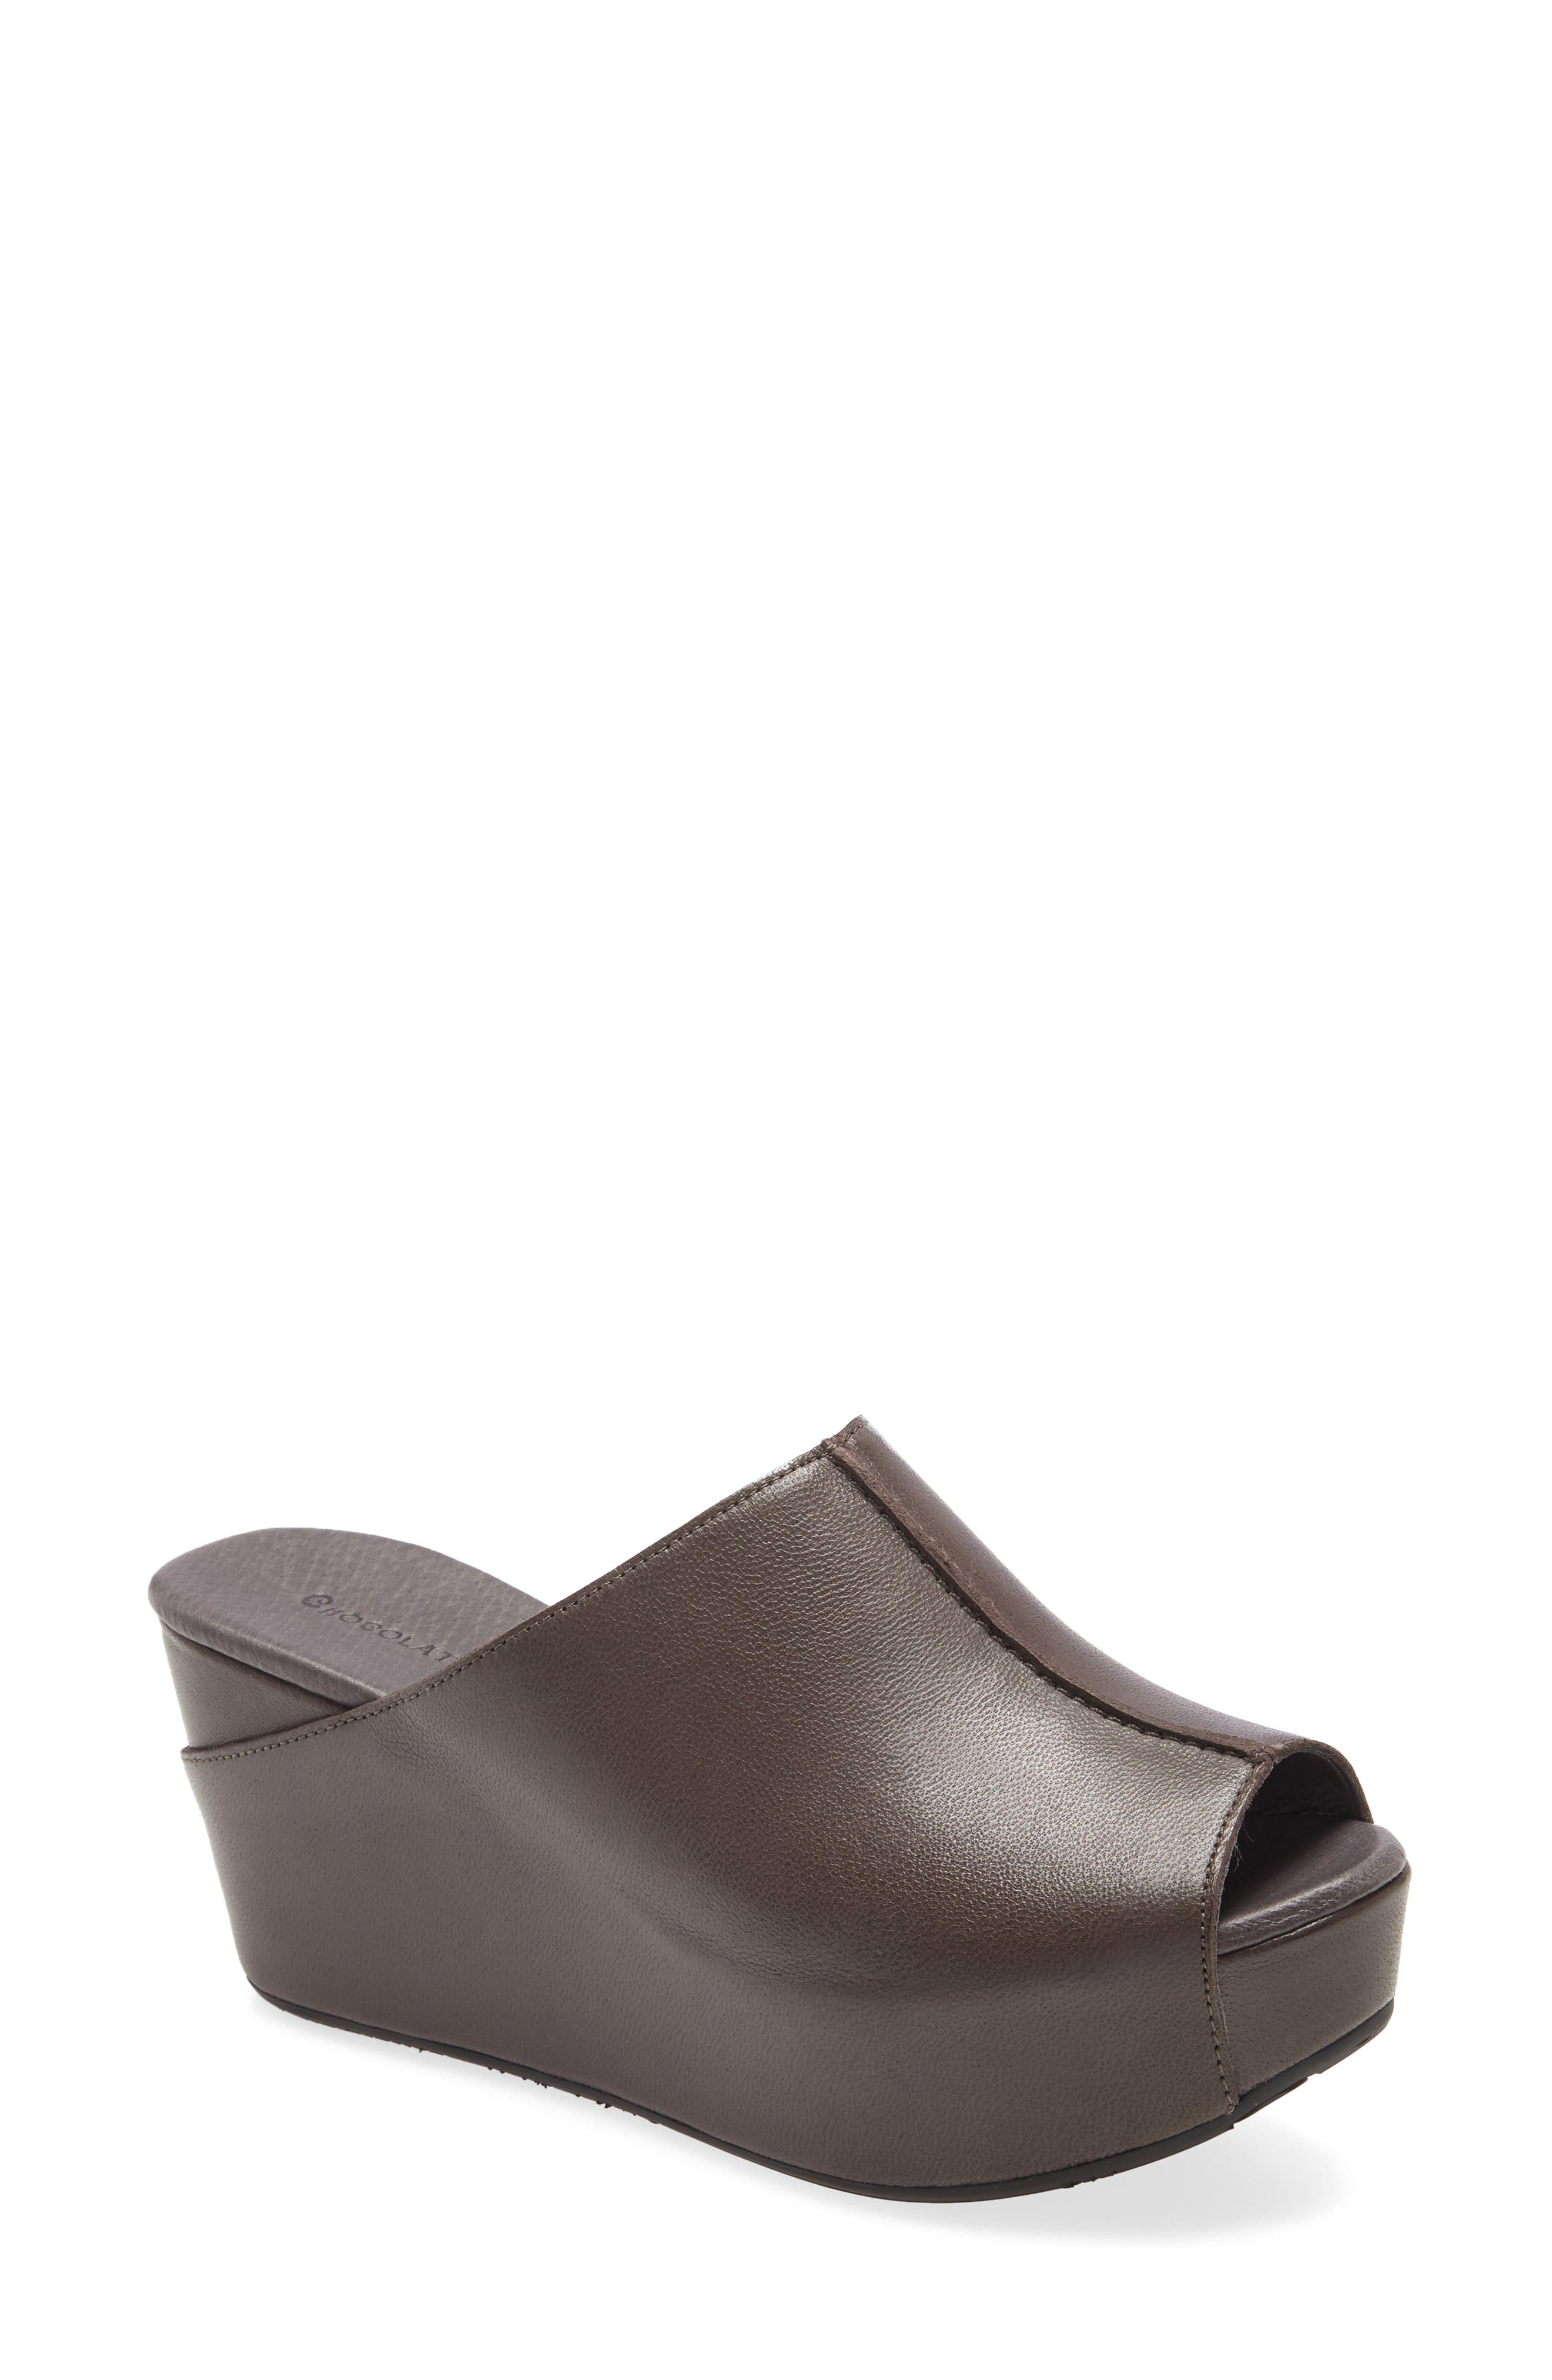 slip on clogs and mules